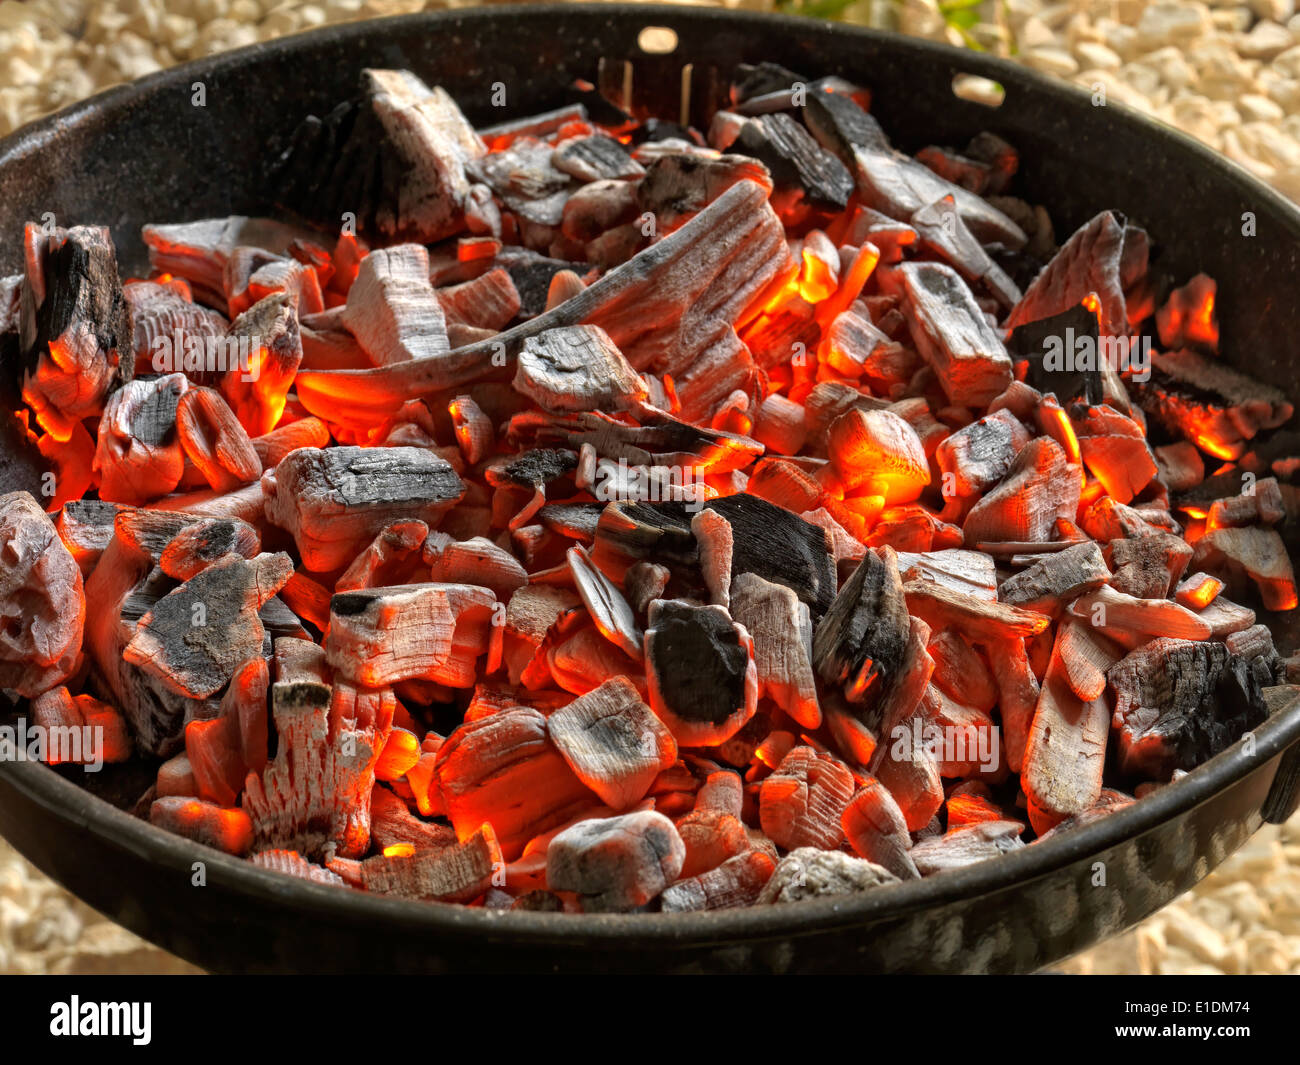 Charcoal grill stove Stock Photo